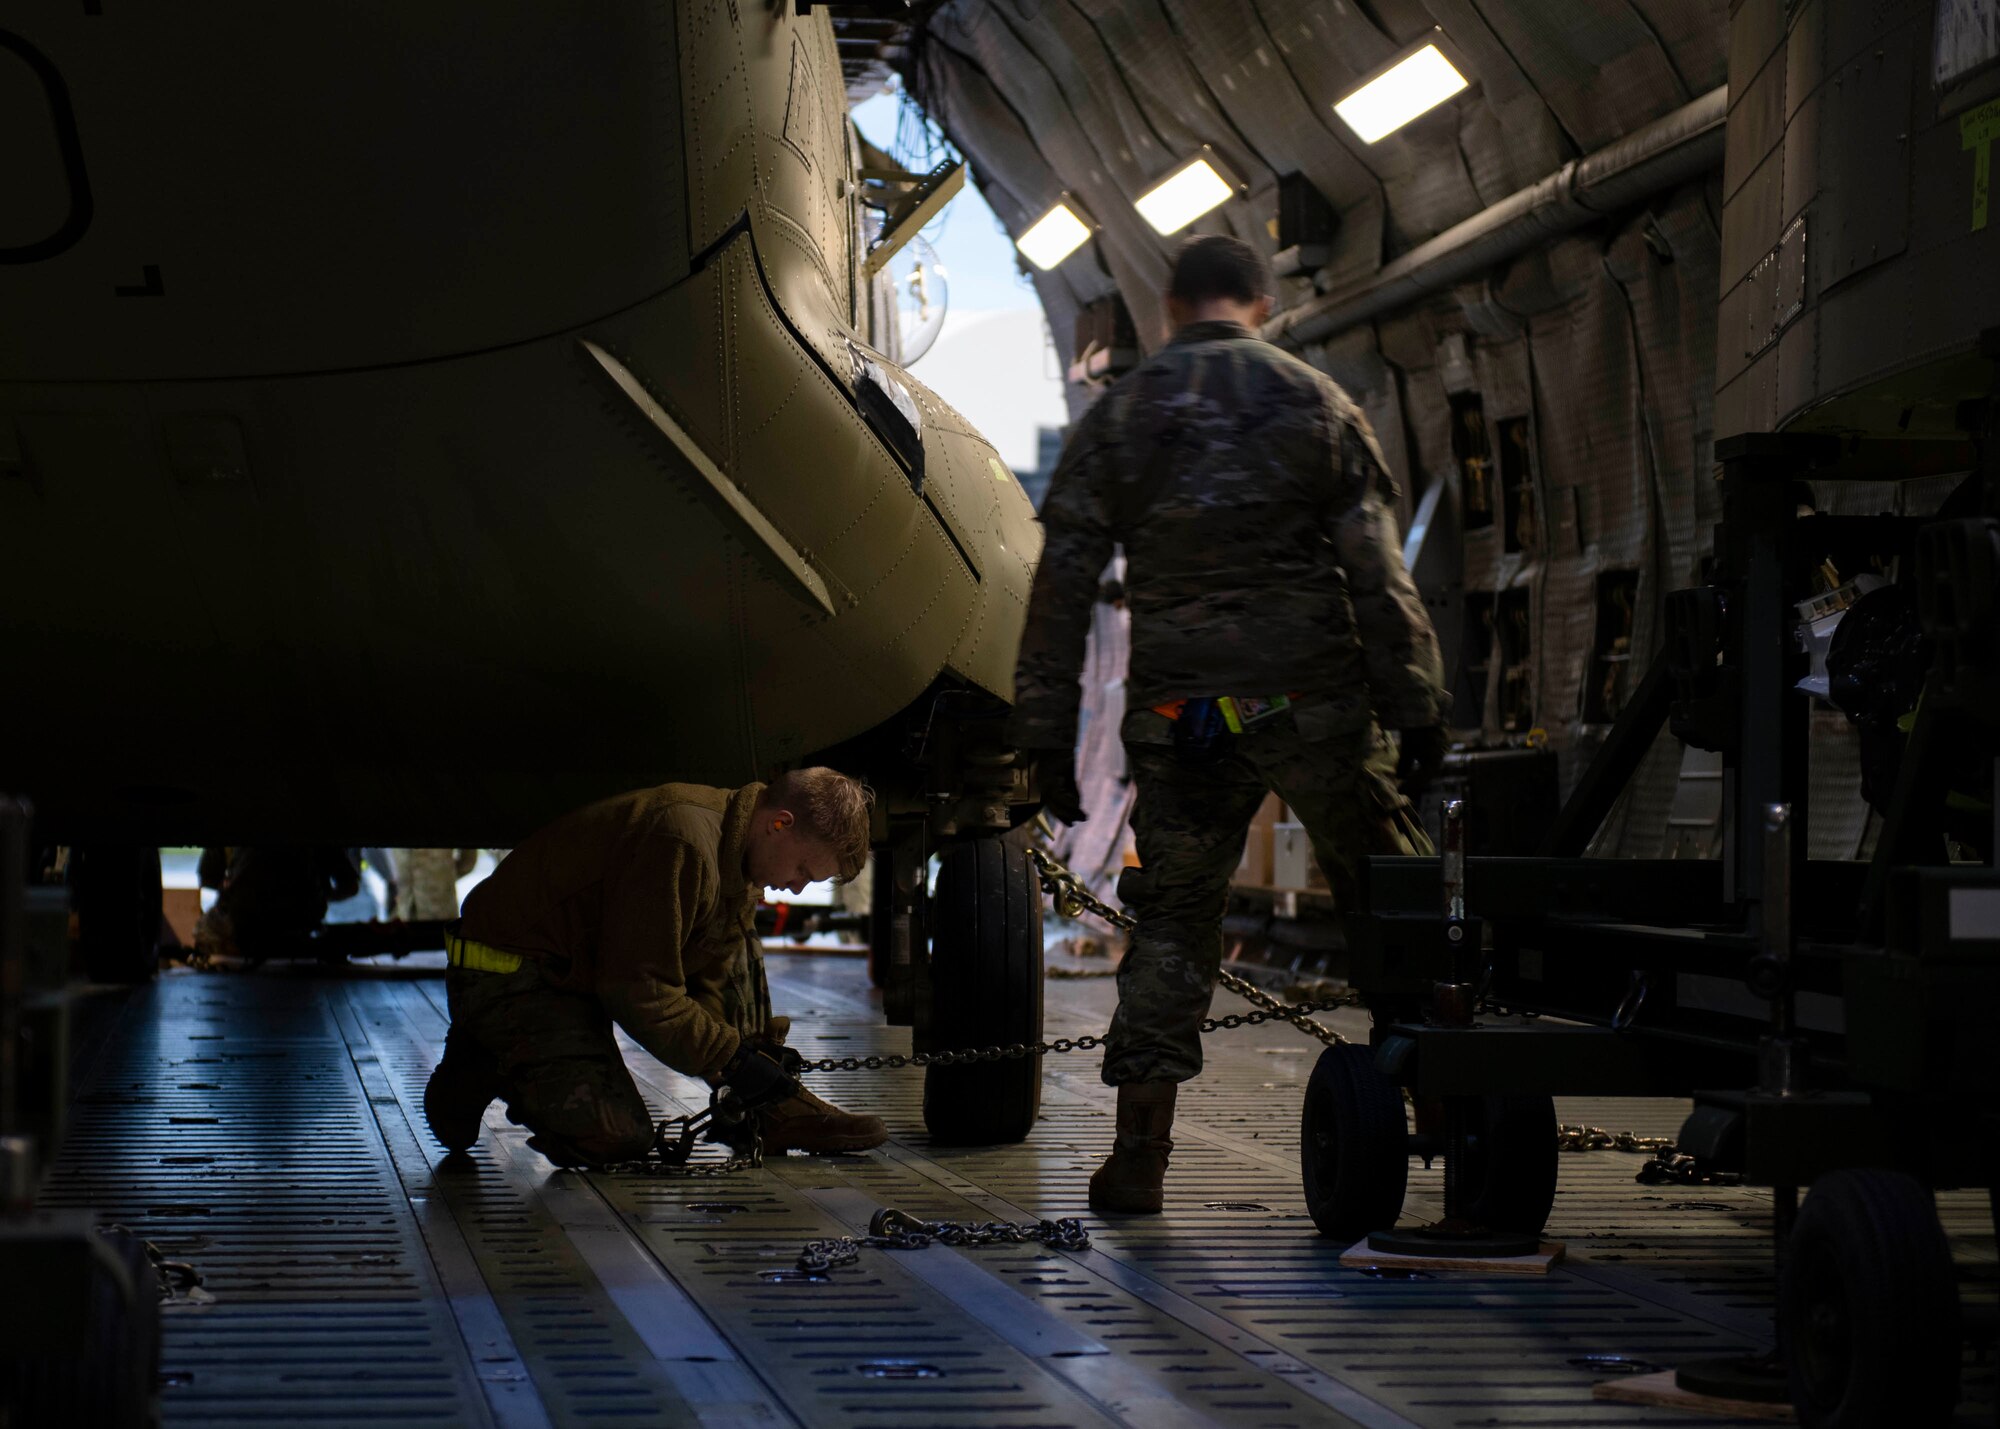 436th Aerial Port Squadron ramp services personnel secure a CH-47F Chinook helicopter in a C-5M Super Galaxy during a foreign military sales mission at Dover Air Force Base, Delaware, June 16, 2022. The U.S. and Australia maintain a robust relationship that serves as an anchor for peace and stability in the Indo-Pacific region and around the world. Due to its strategic location, Dover AFB supports approximately $3.5 billion worth of foreign military sales annually. (U.S. Air Force photo by Tech. Sgt. J.D. Strong II)